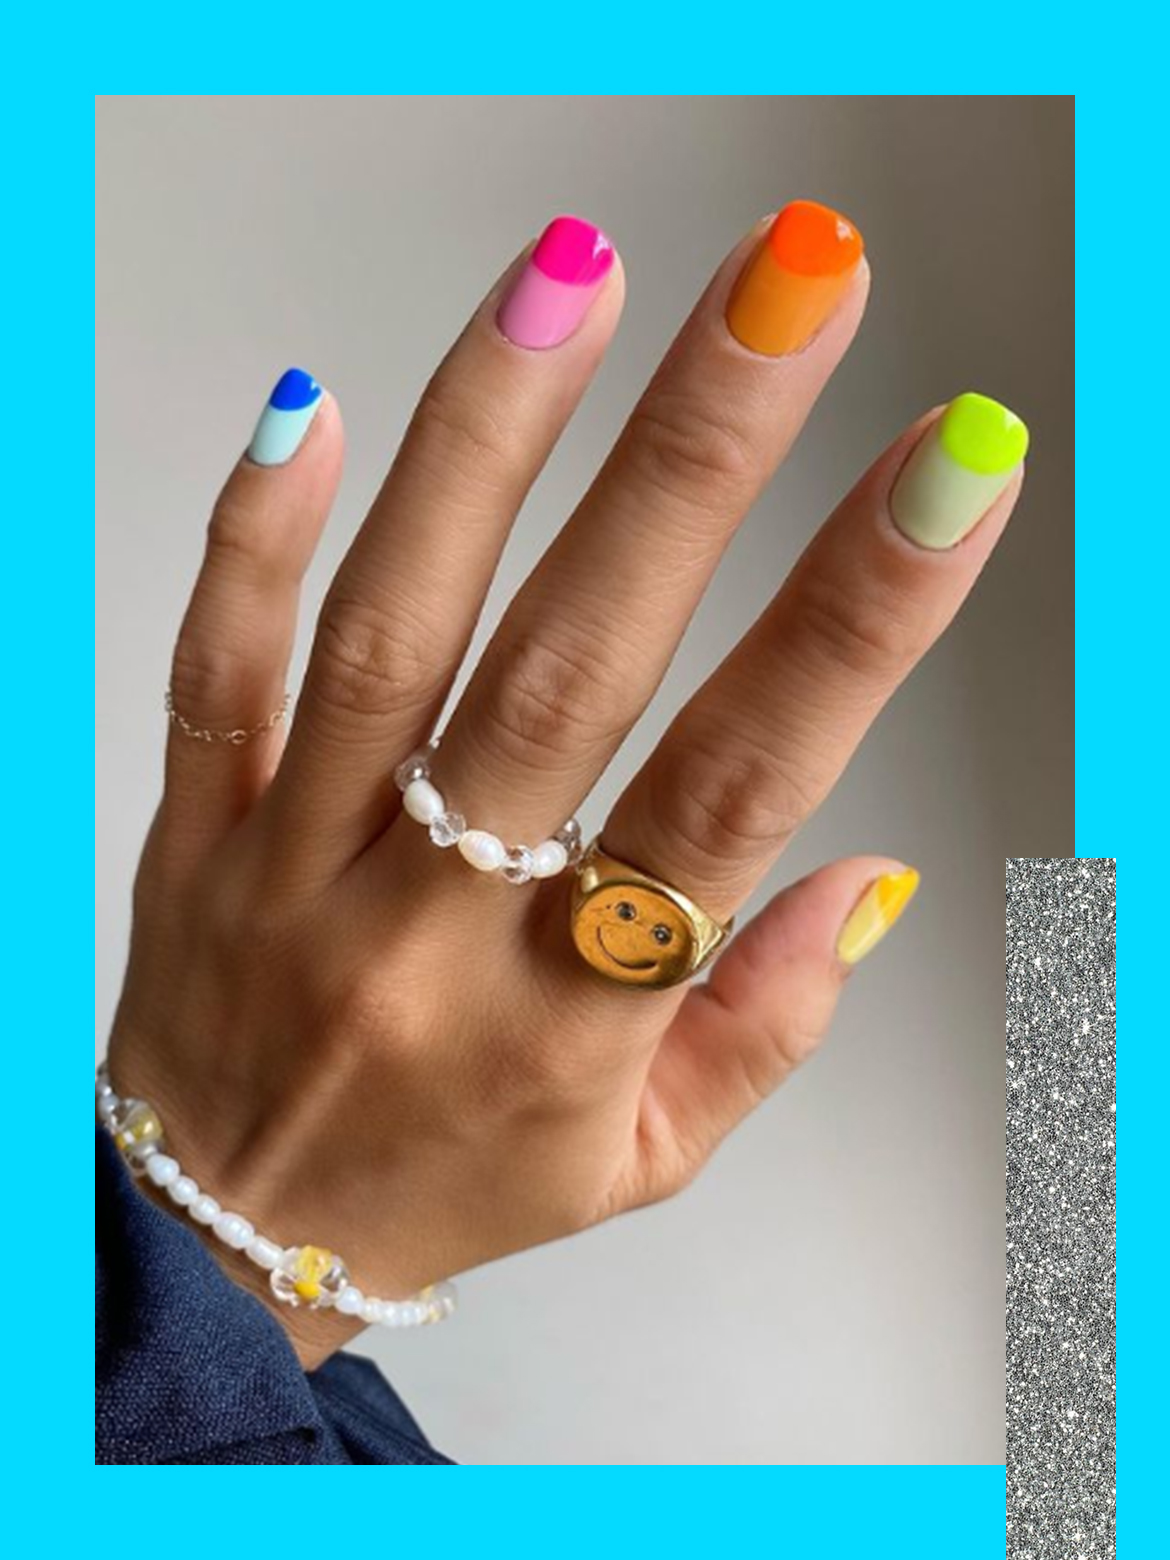 Colour Spa Lounge Unisex Salon - Neon nails with gel nail paint and nail  extensions done @colourspalounge Book yourself now and 25% off on nail  extensions. T&c apply Offer valid for limited